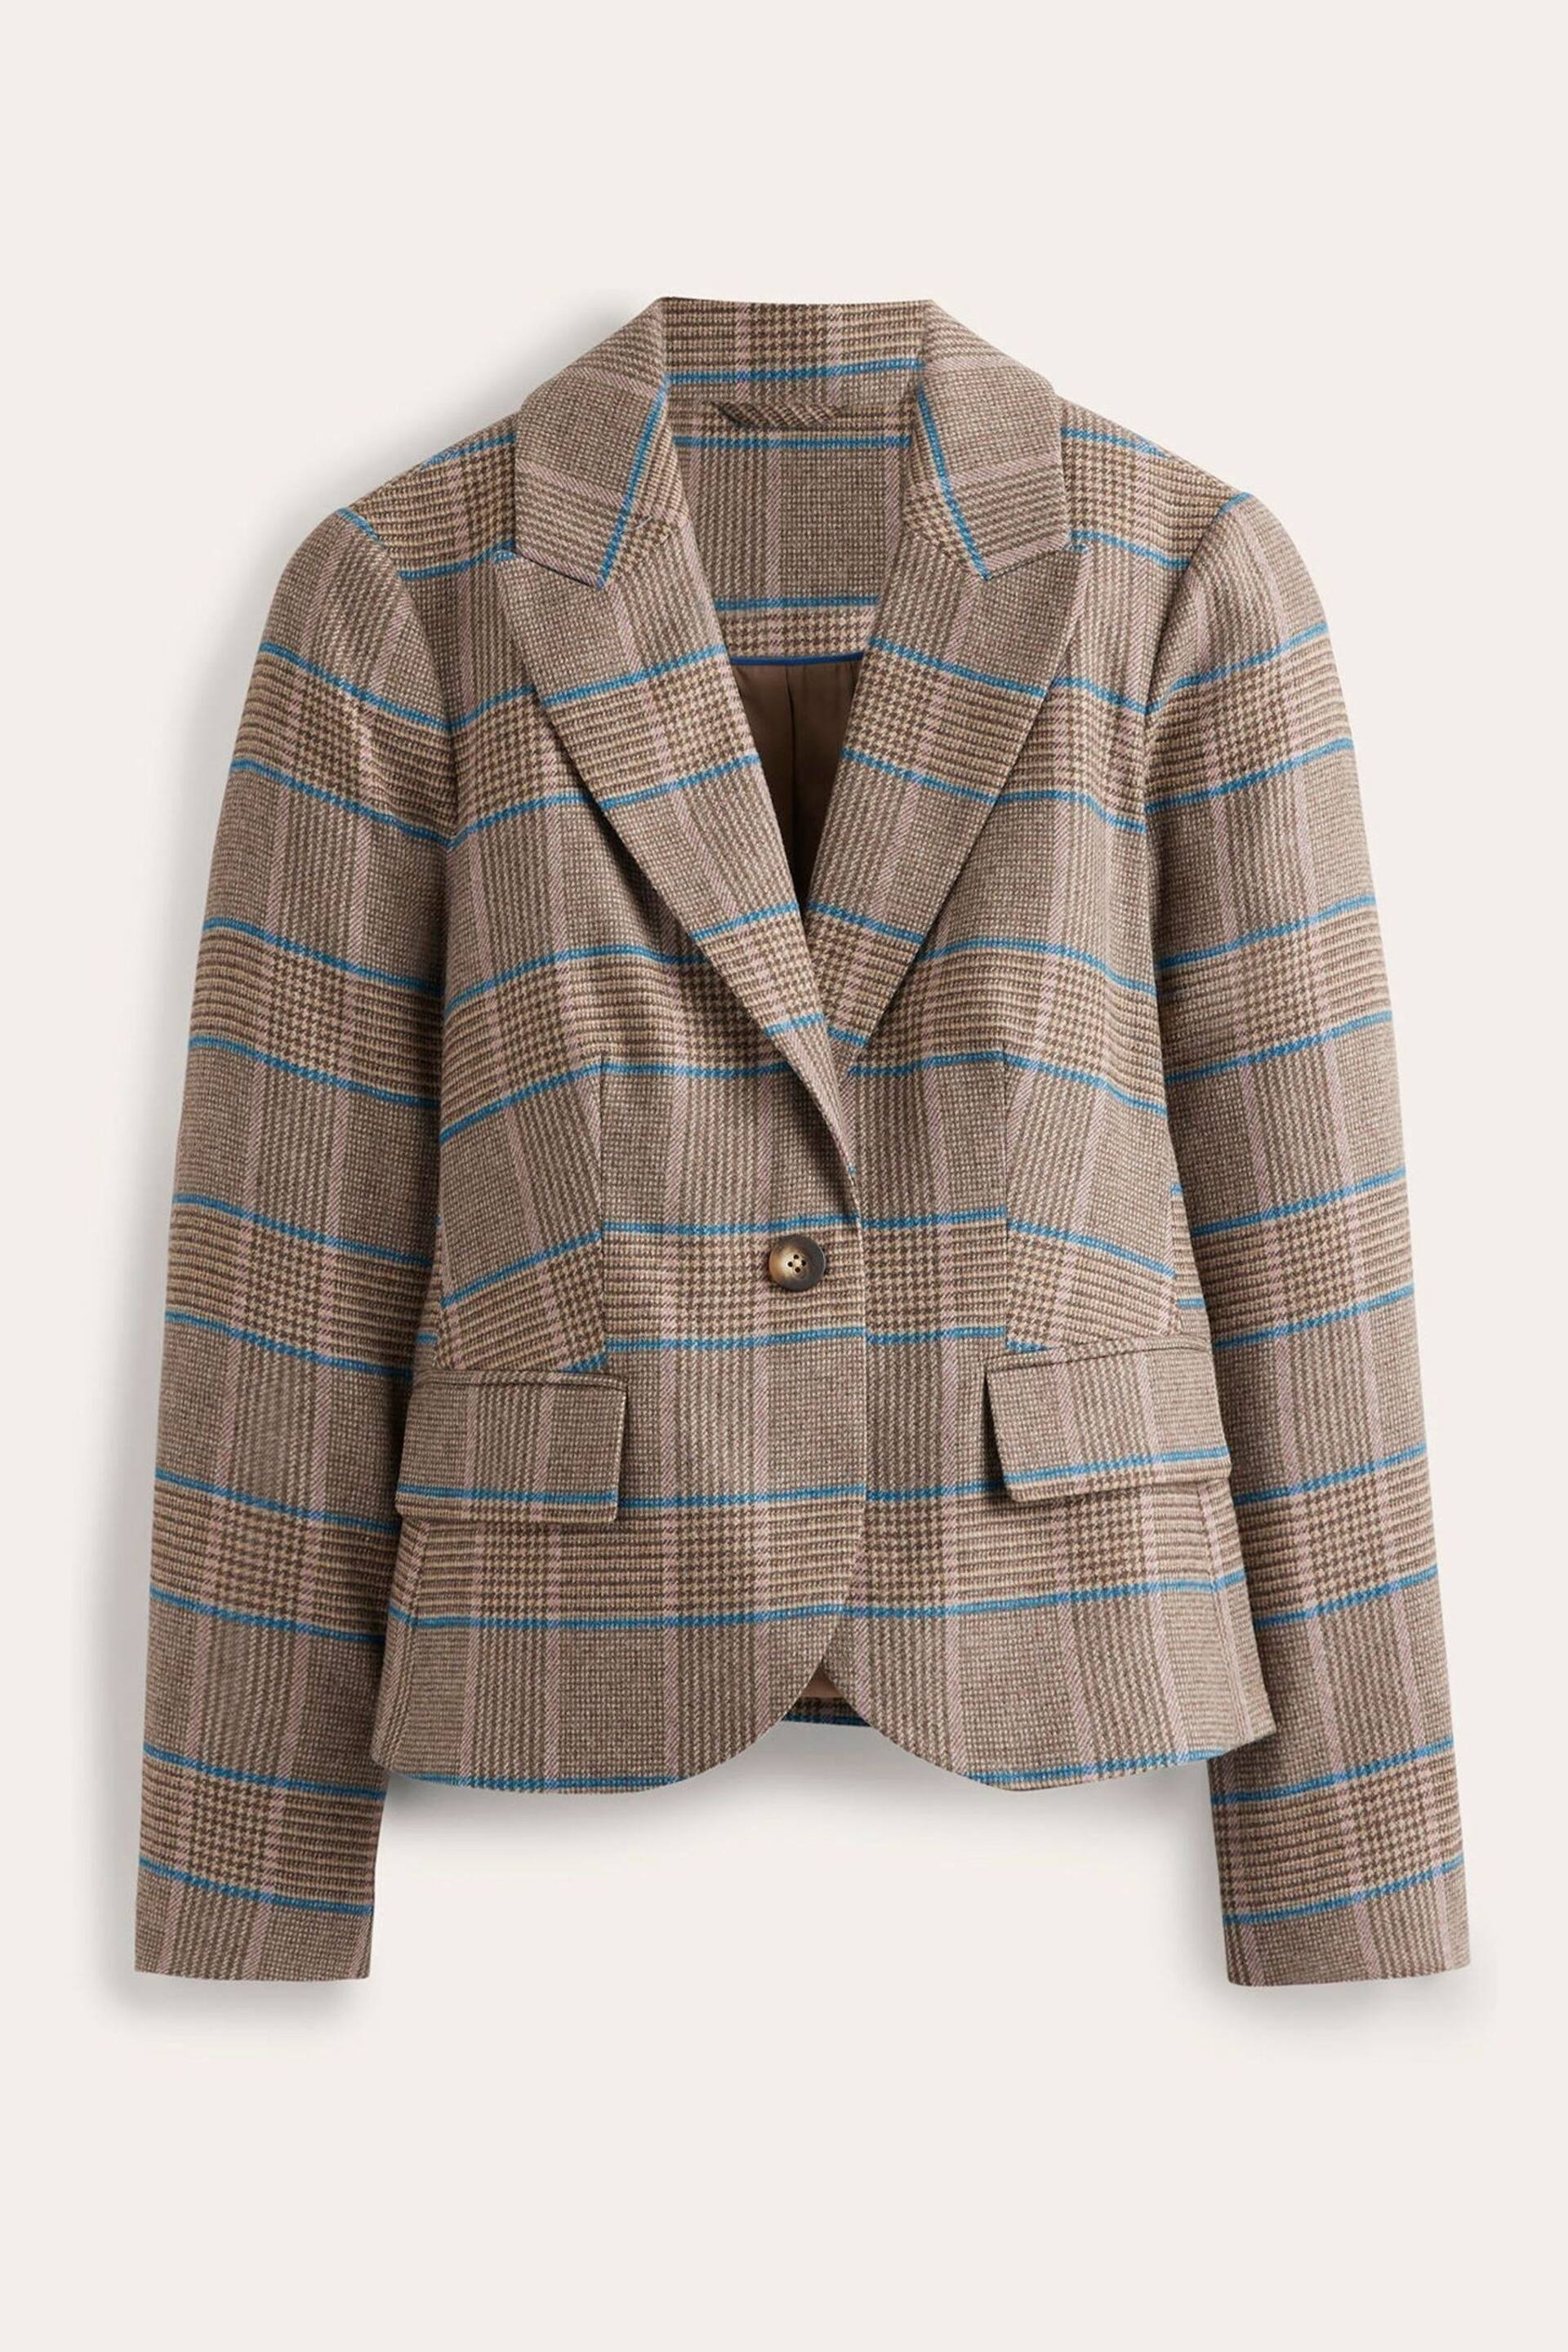 Boden Brown The Canonbury Wool Blazer - Image 6 of 6